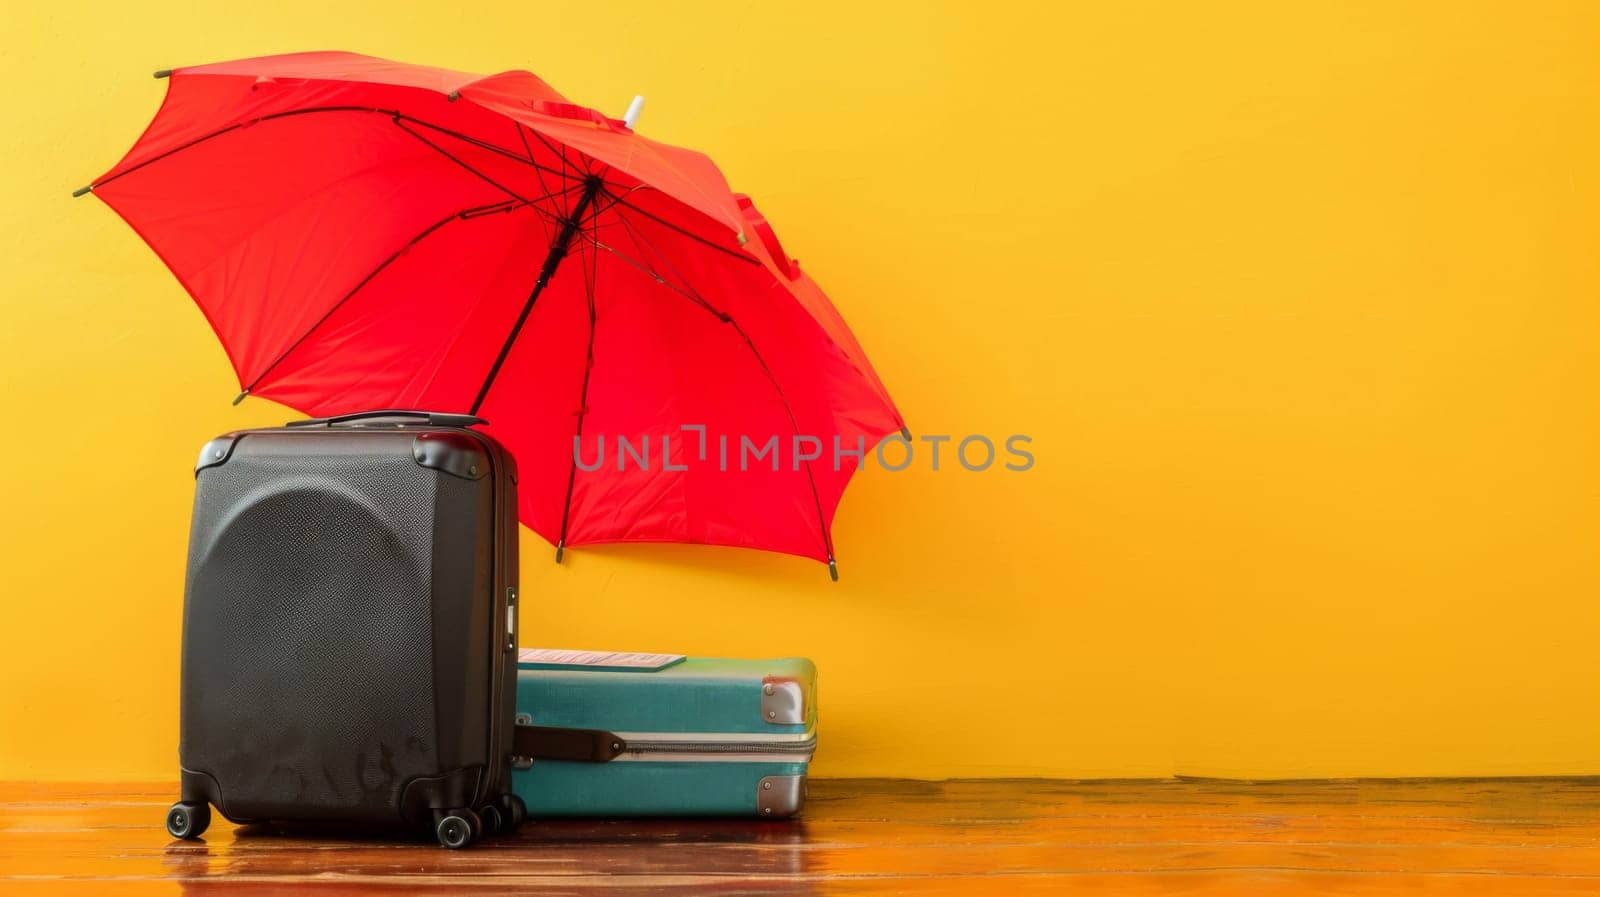 A red umbrella and luggage on a yellow wall